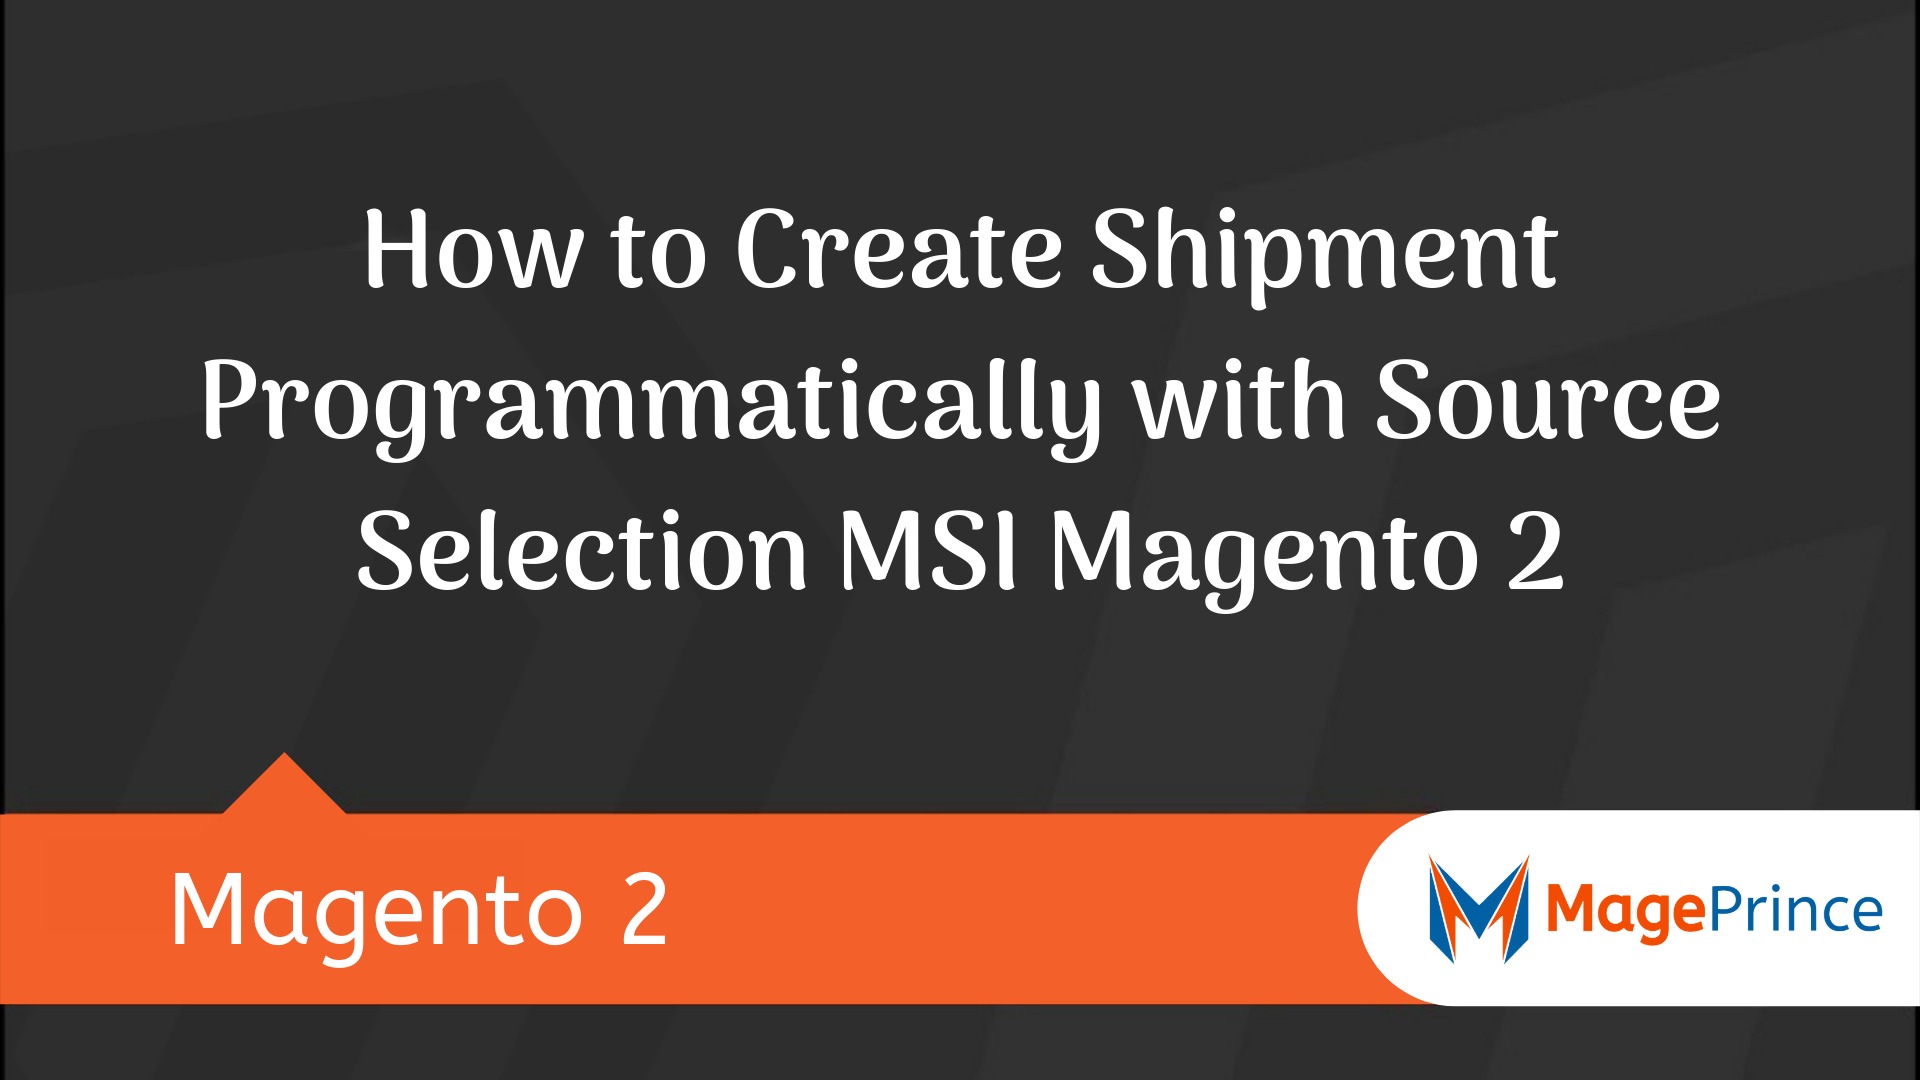 How to Create Shipment Programmatically with Source Selection MSI Magento 2